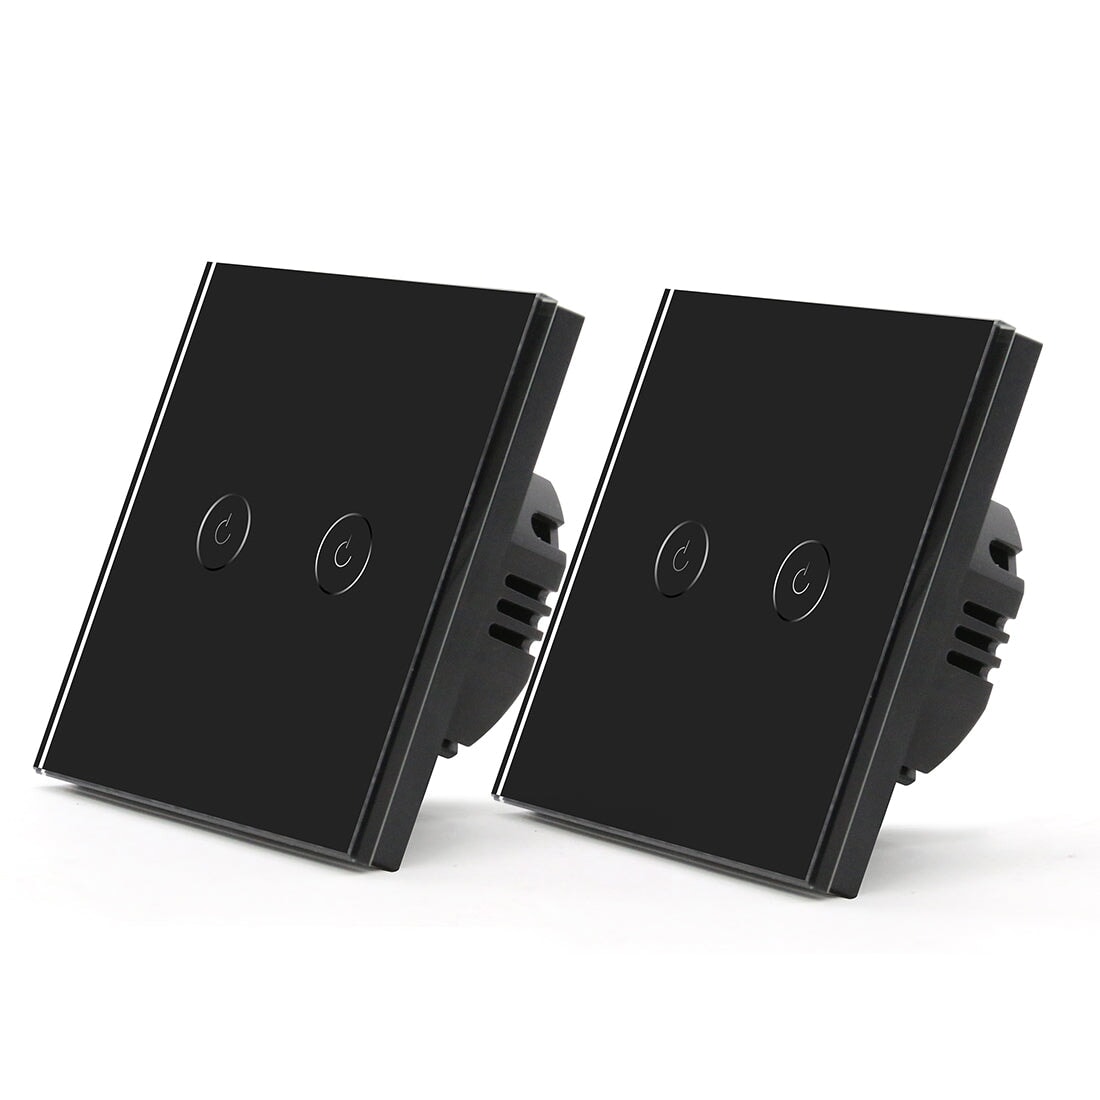 Bseed Smart Wifi Touch Switch 2 Gang 1/2/3 Way 1/2/3 Pcs/Pack Wall Plates & Covers Bseedswitch Black 2Pcs/Pack 